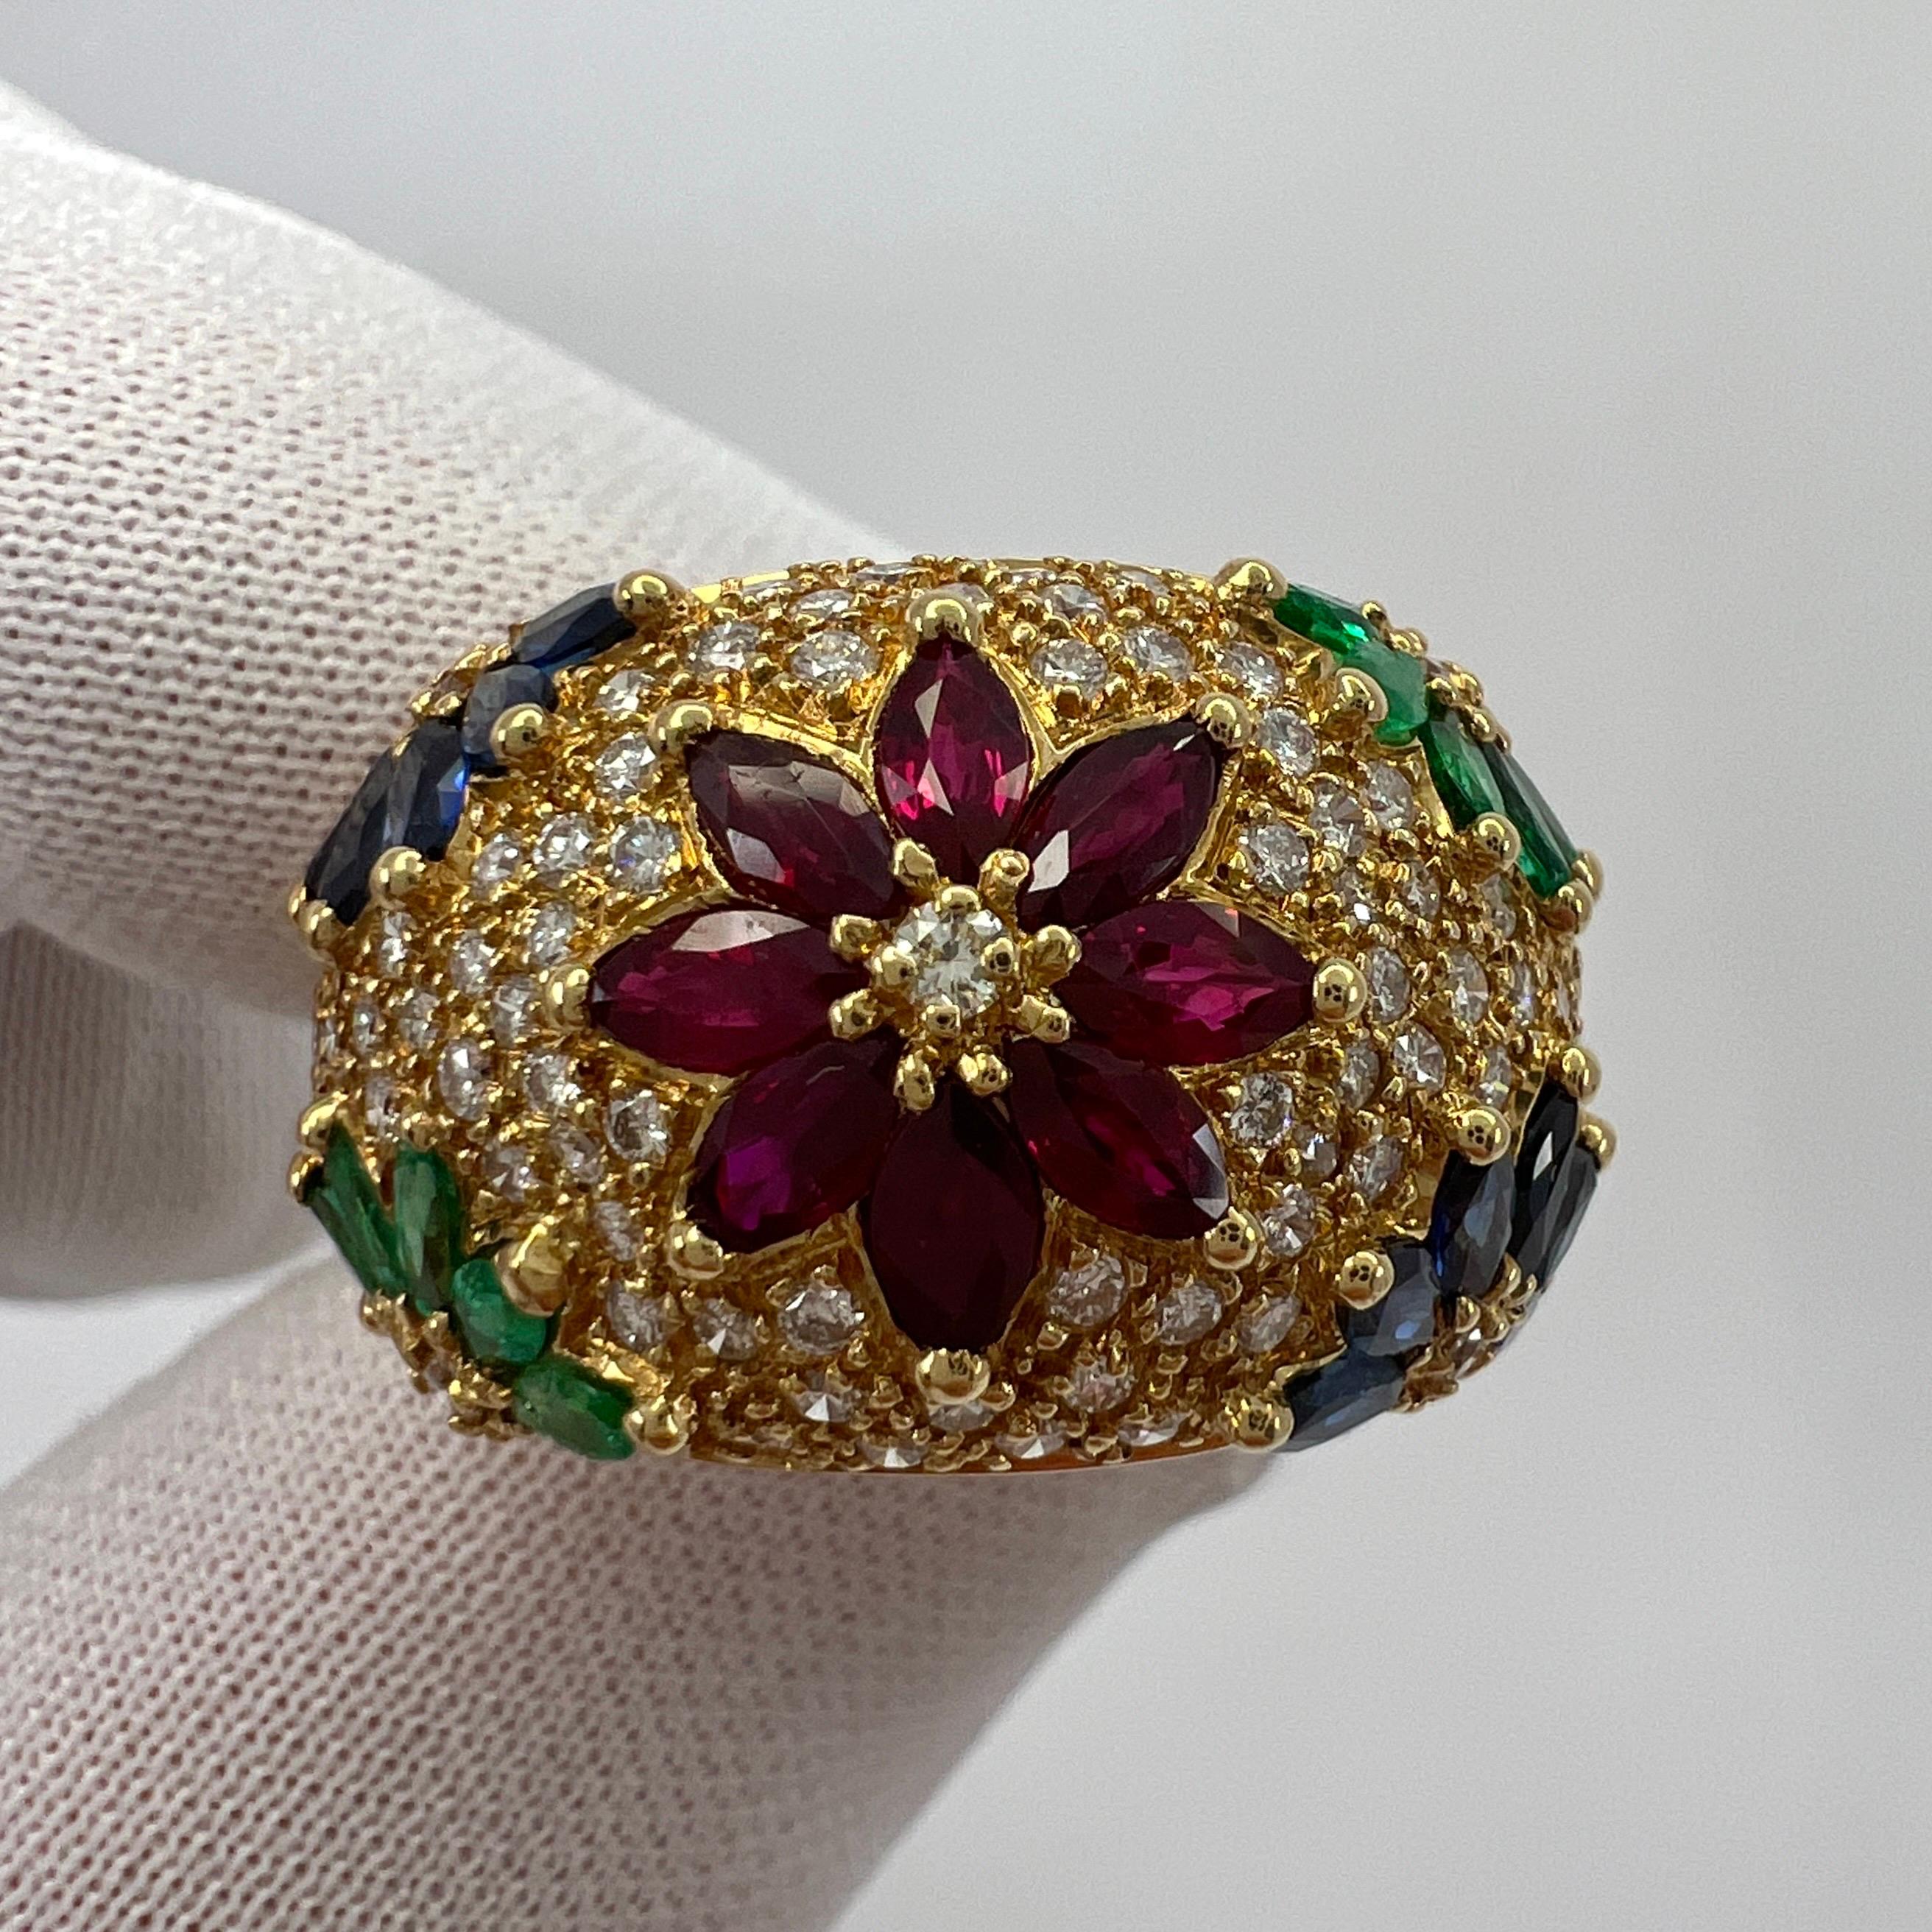 Fine 3.76tcw Ruby, Sapphire, Emerald And Diamond 18k Yellow Gold Tutti Frutti Dome Ring.

A beautifully made ring set with superbly matched and calibrated coloured stones of excellent quality. Set in a radiating, flower style marquise